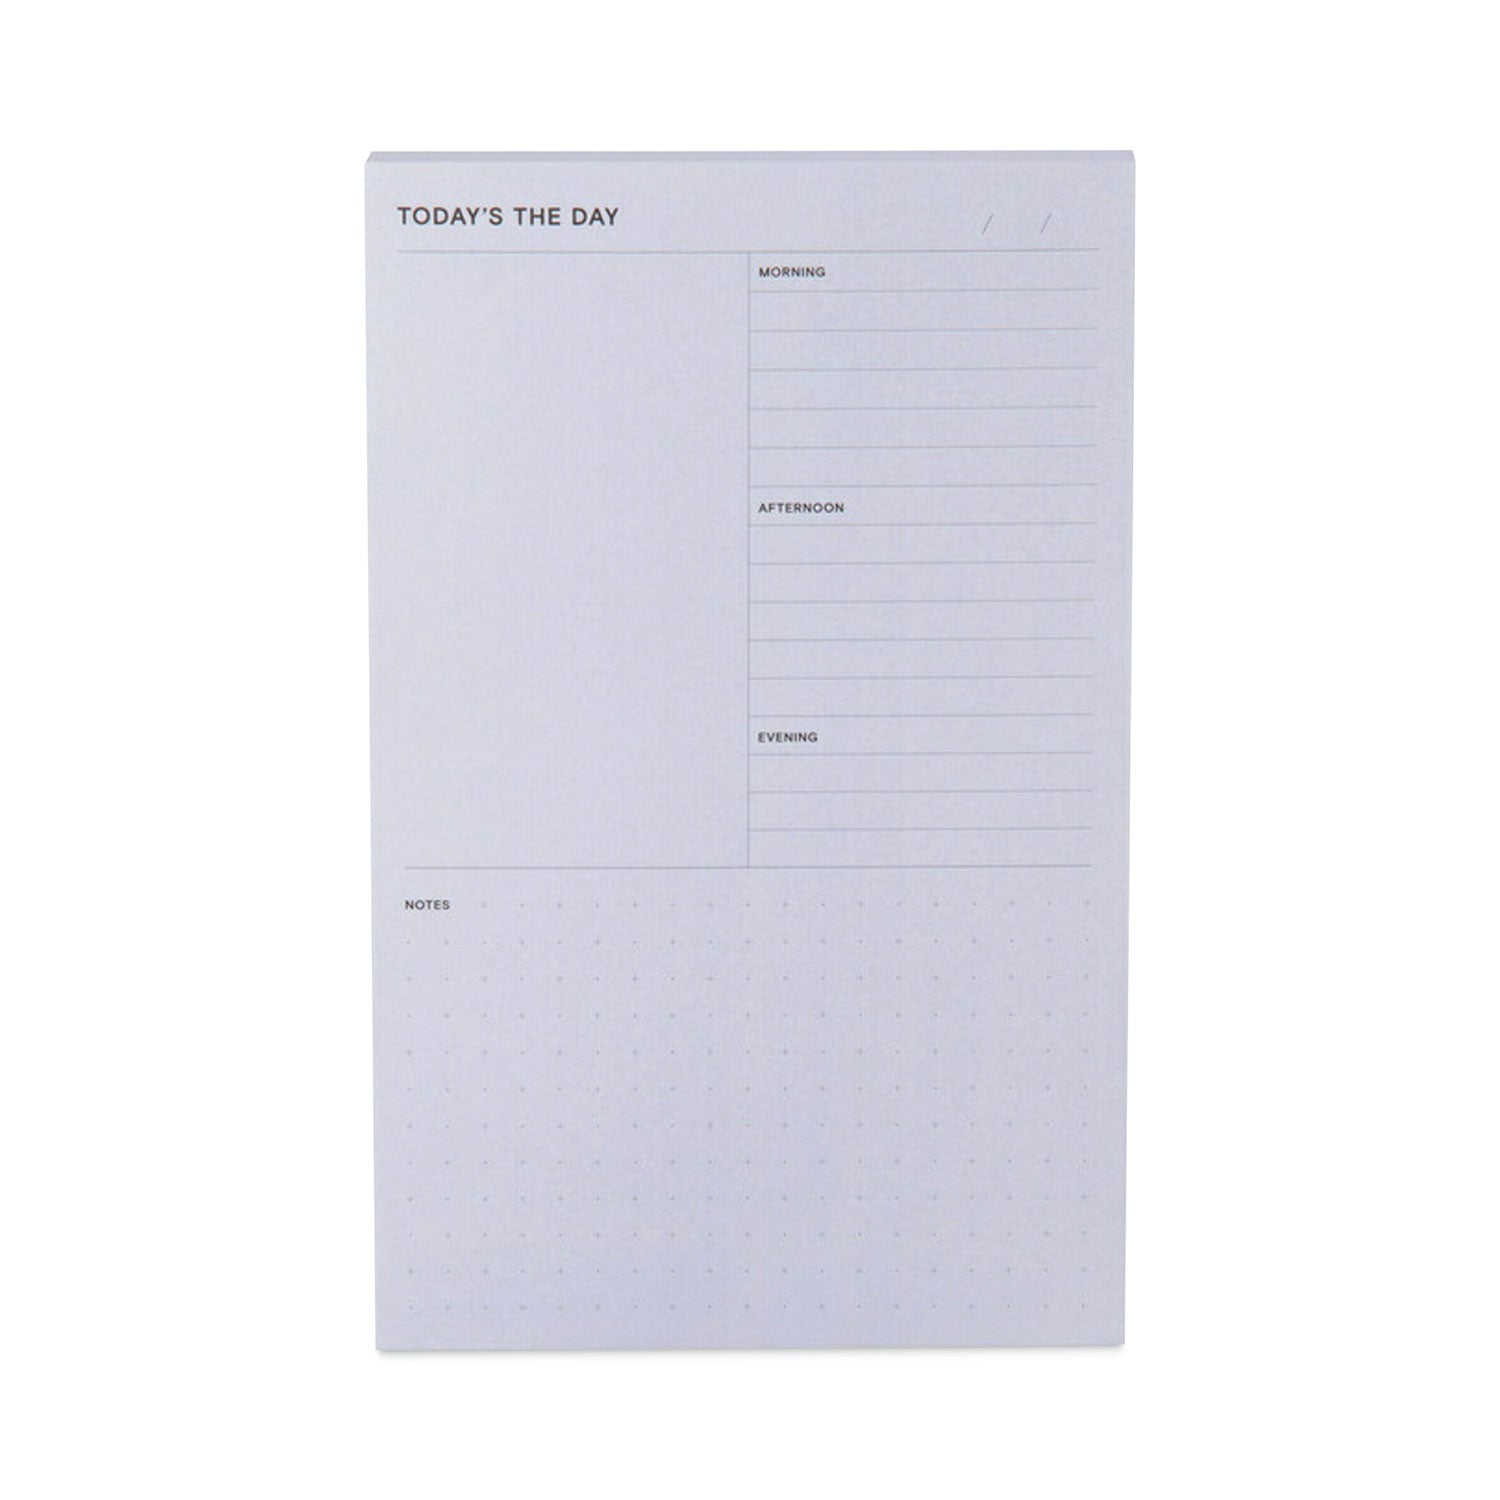 adhesive-daily-planner-sticky-note-pads-daily-planner-format-49-x-77-gray-100-sheets-pad_mmm58gry - 1